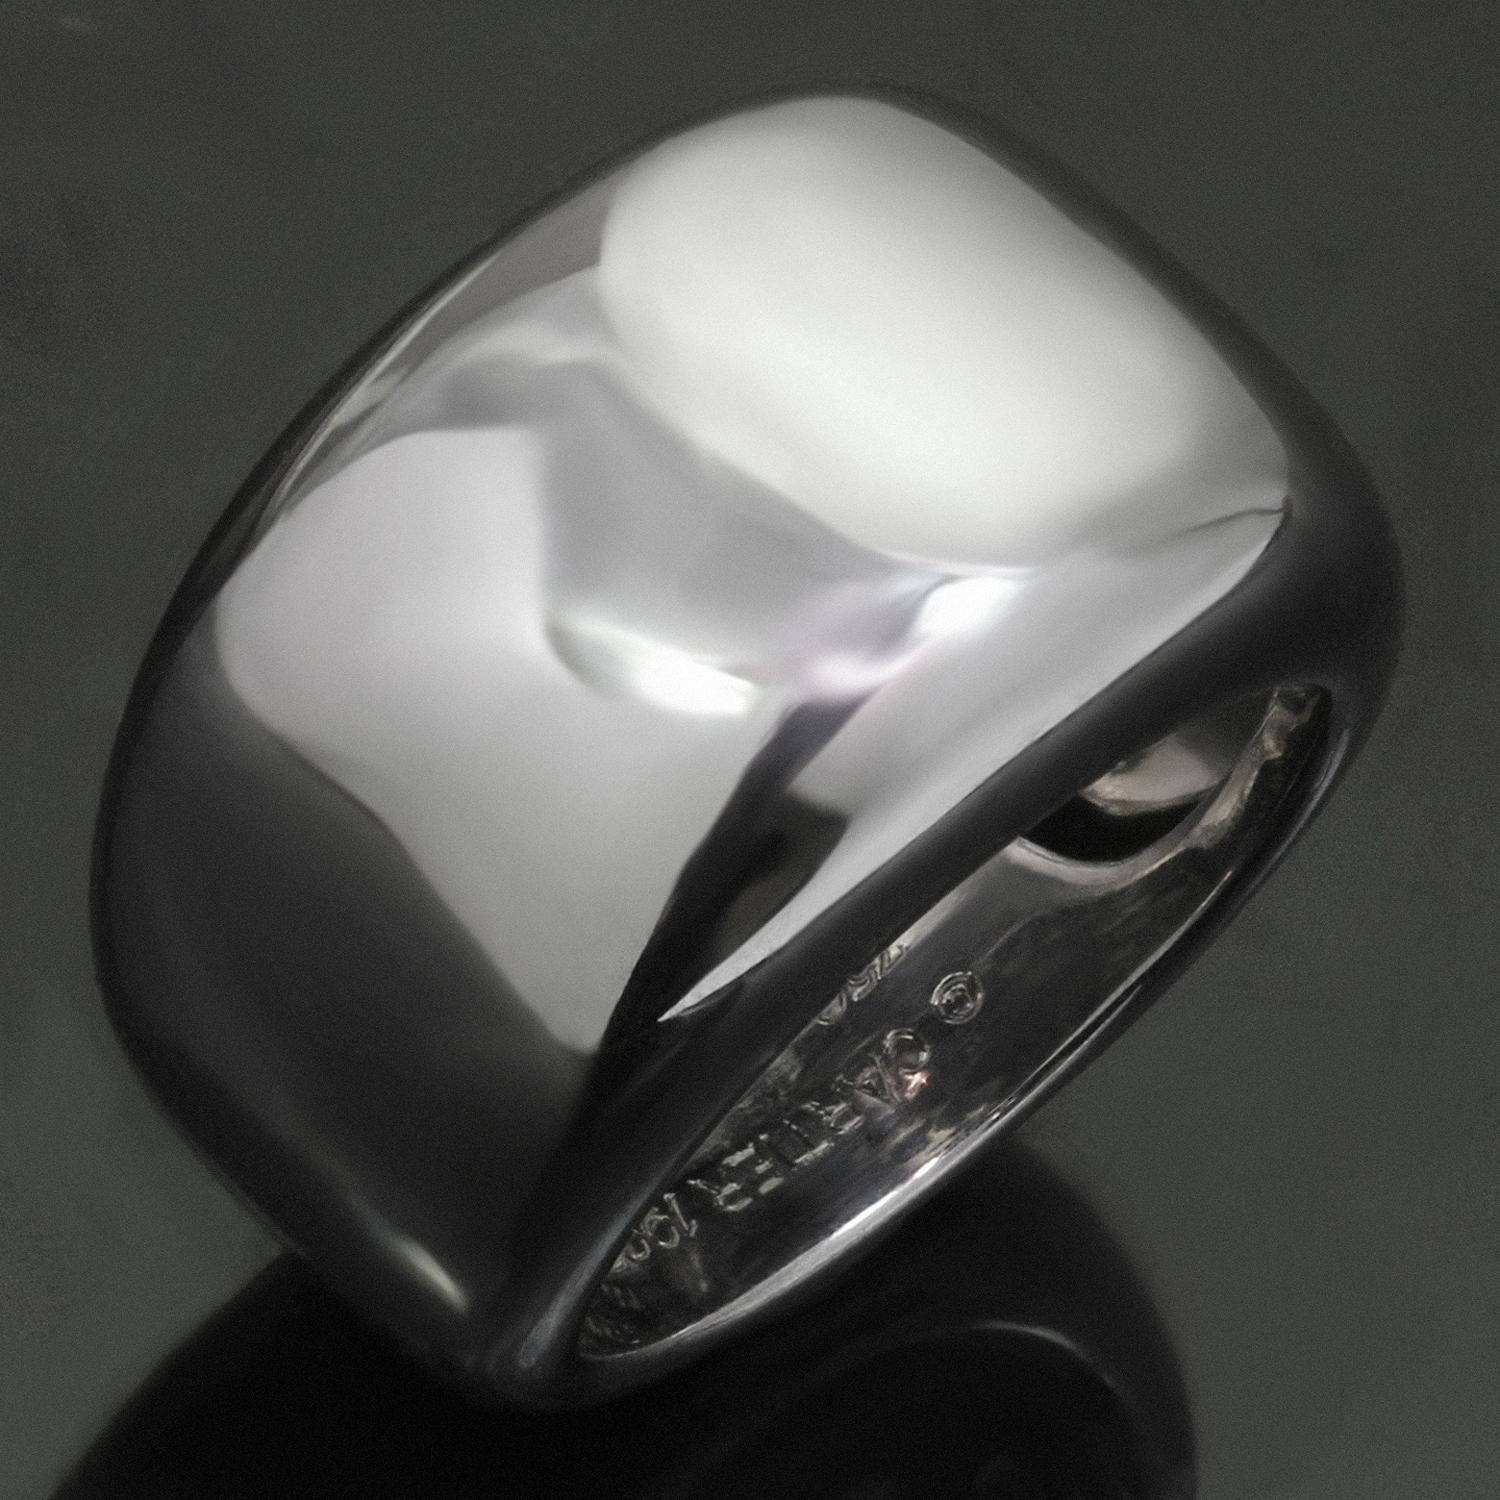 This classic Cartier ring from the Nouvelle Vague collection features a wide band design crafted in 18k white gold. Made in France circa 1997. Measurements: 0.55